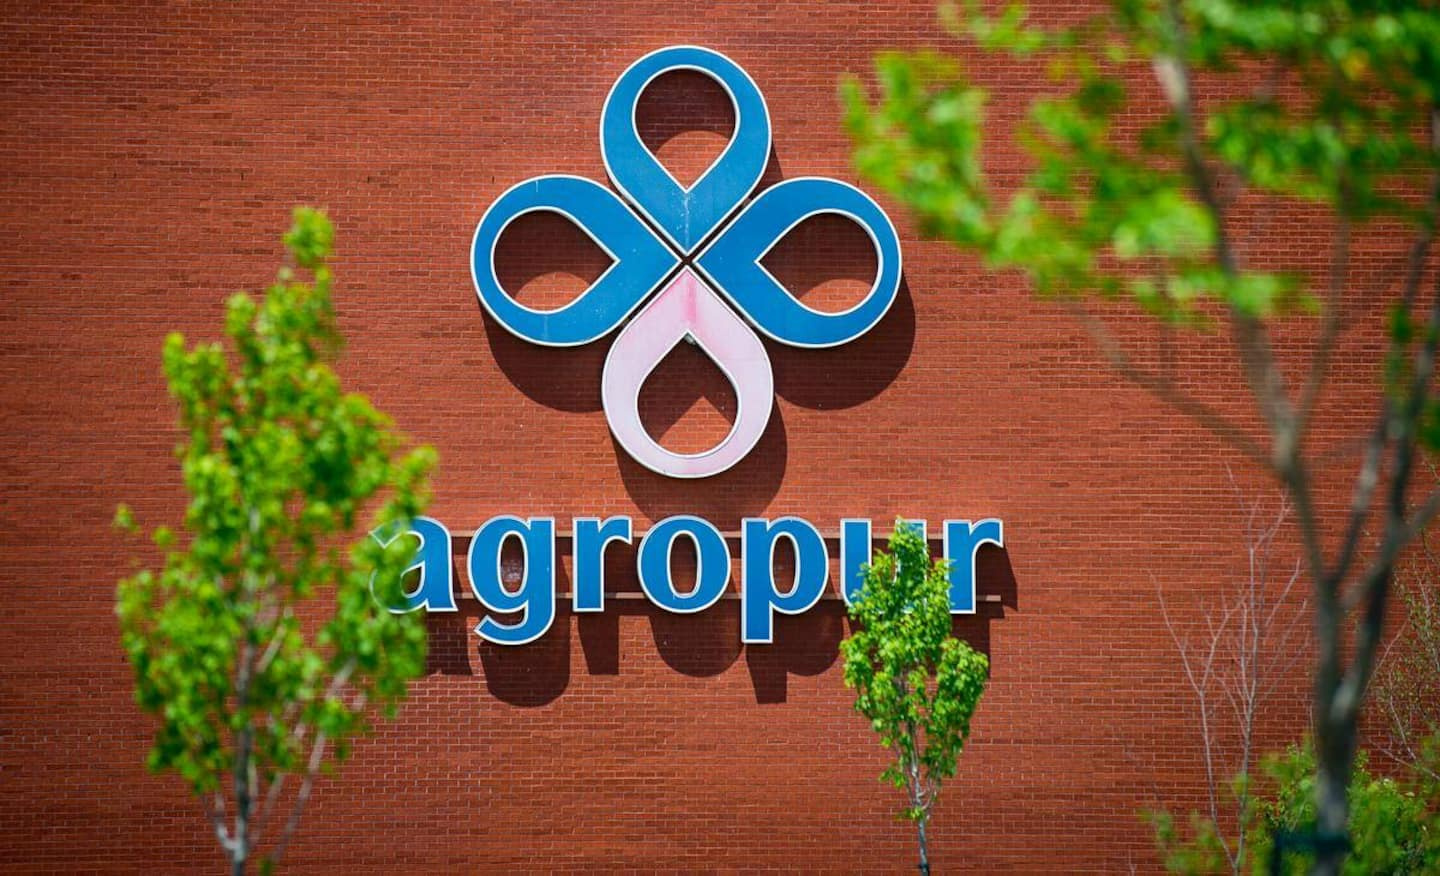 Agropur and the union reach an agreement in principle